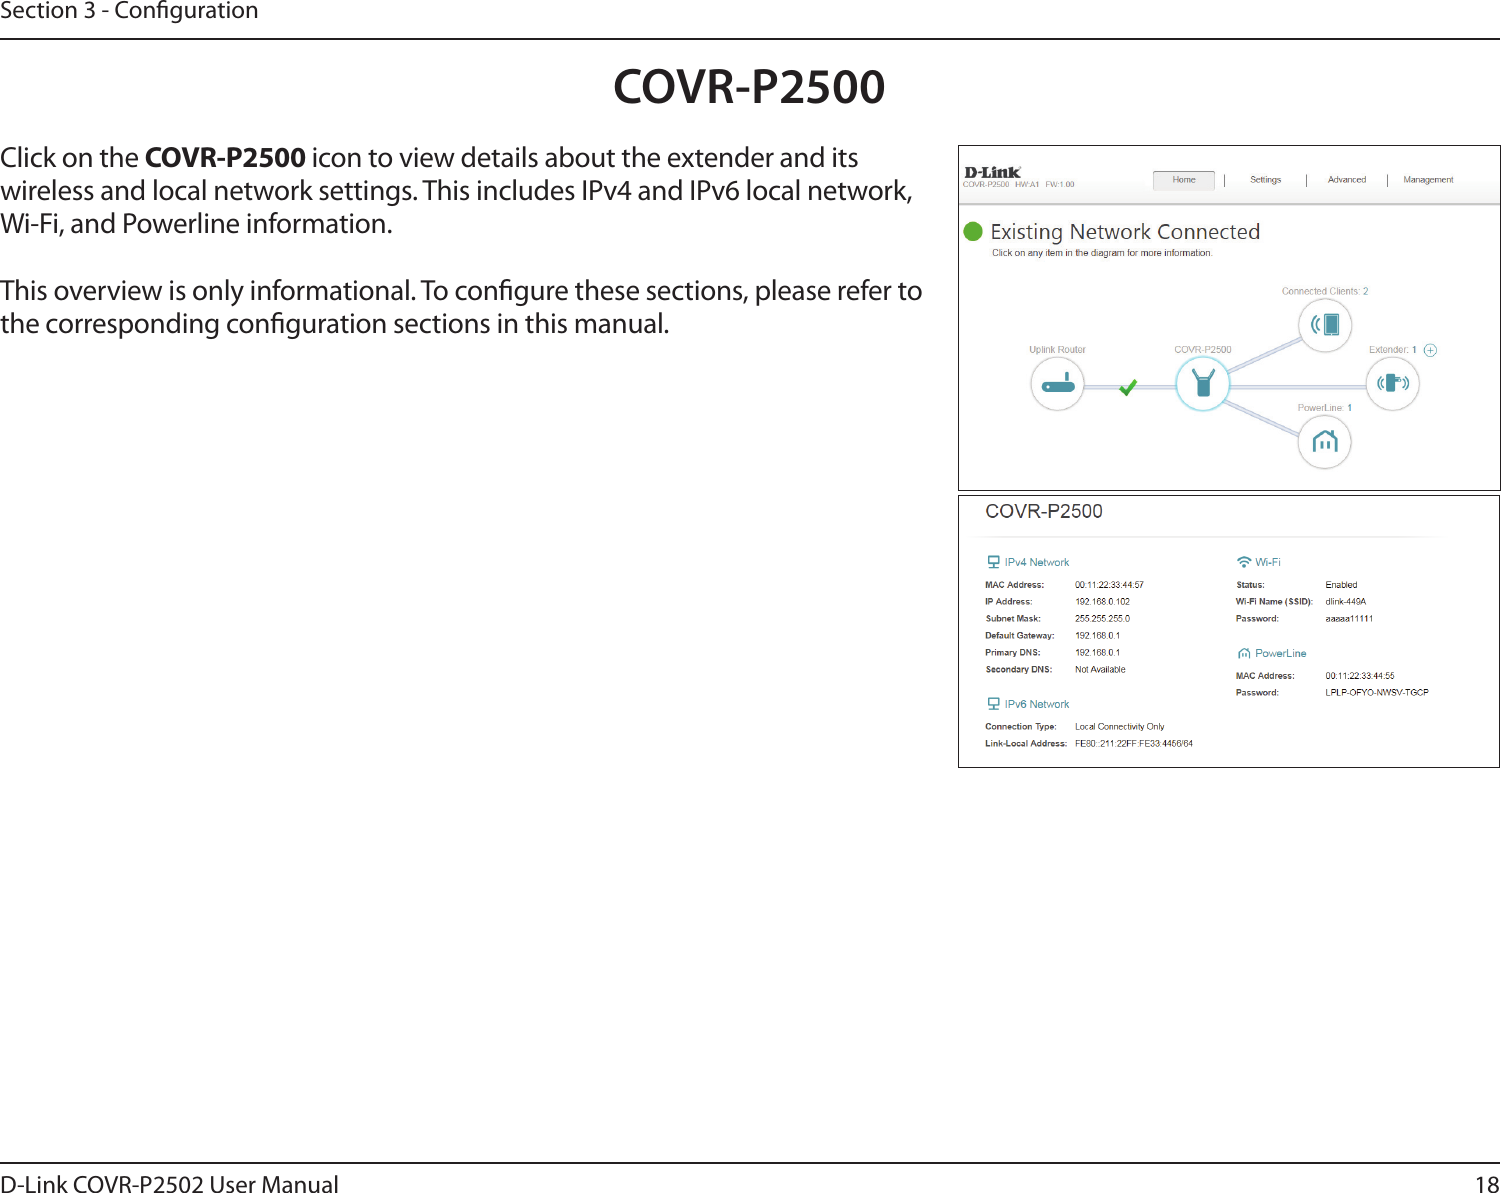 18D-Link COVR-P2502 User ManualSection 3 - CongurationCOVR-P2500Click on the COVR-P2500 icon to view details about the extender and its wireless and local network settings. This includes IPv4 and IPv6 local network, Wi-Fi, and Powerline information.This overview is only informational. To congure these sections, please refer to the corresponding conguration sections in this manual.